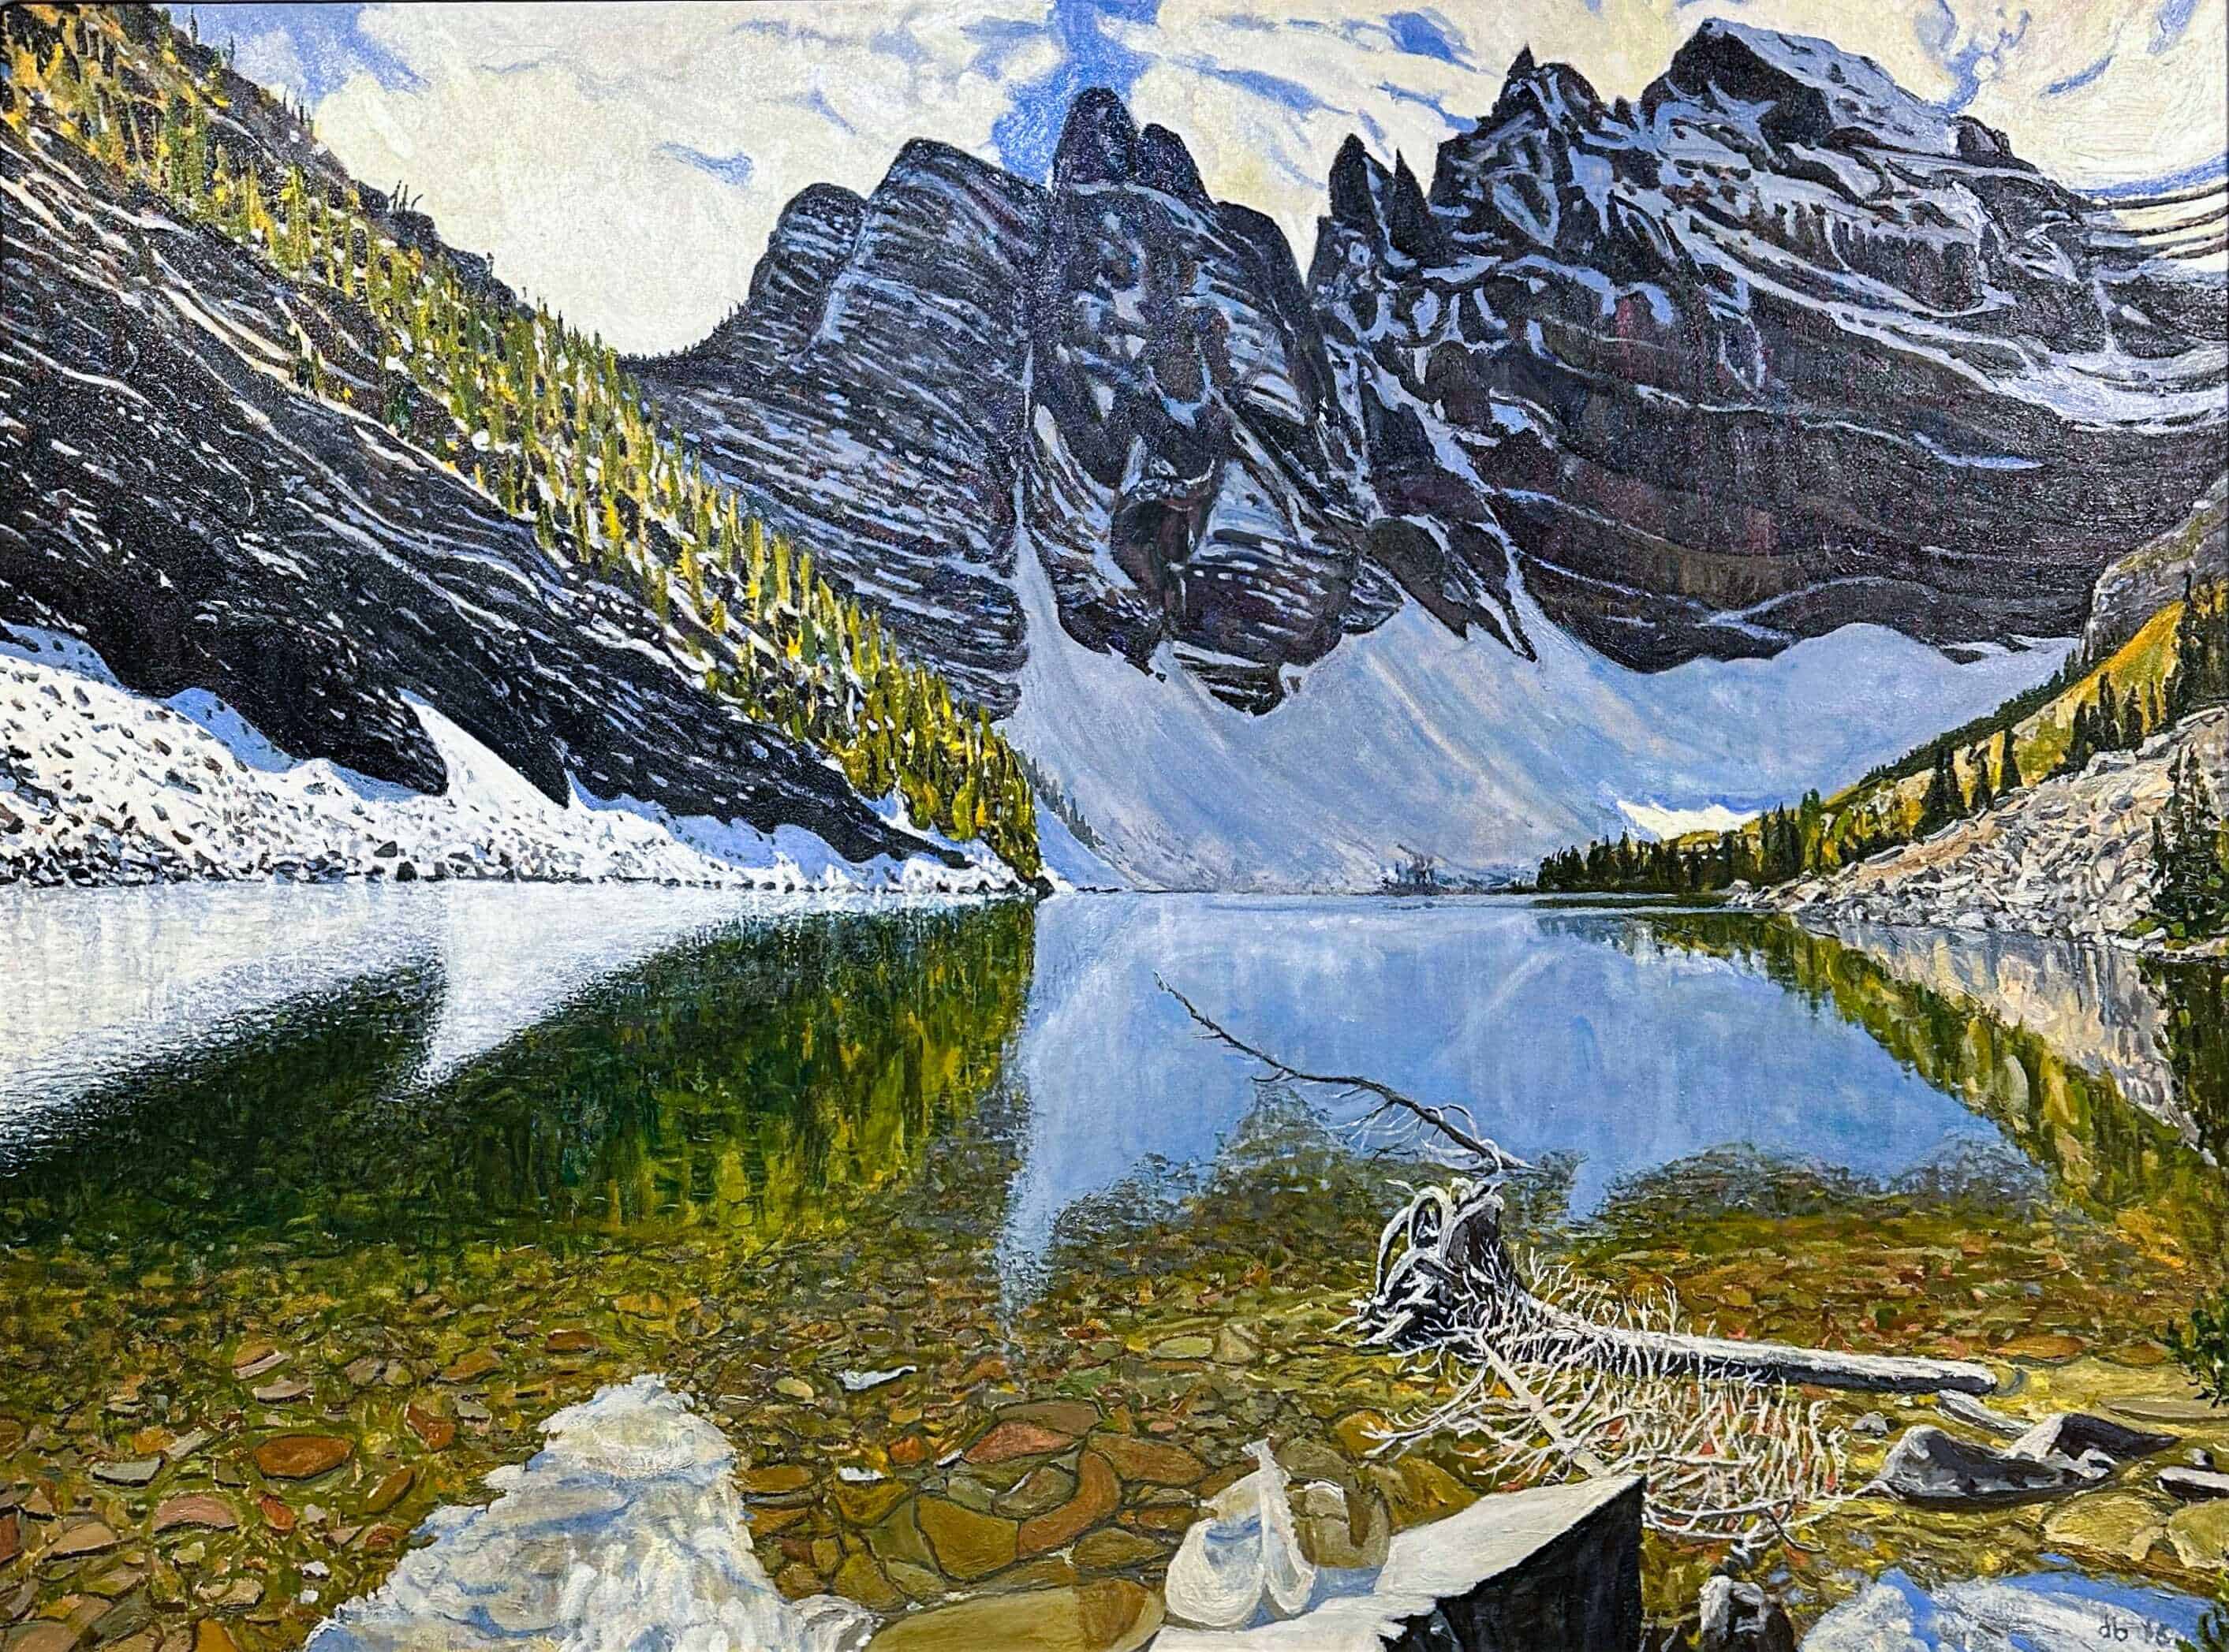 Contemporary Landscape Art. Title: Lake Agnes, Oil on Canvas, 36 x 48 in by Canadian Artist Dennis Brown.